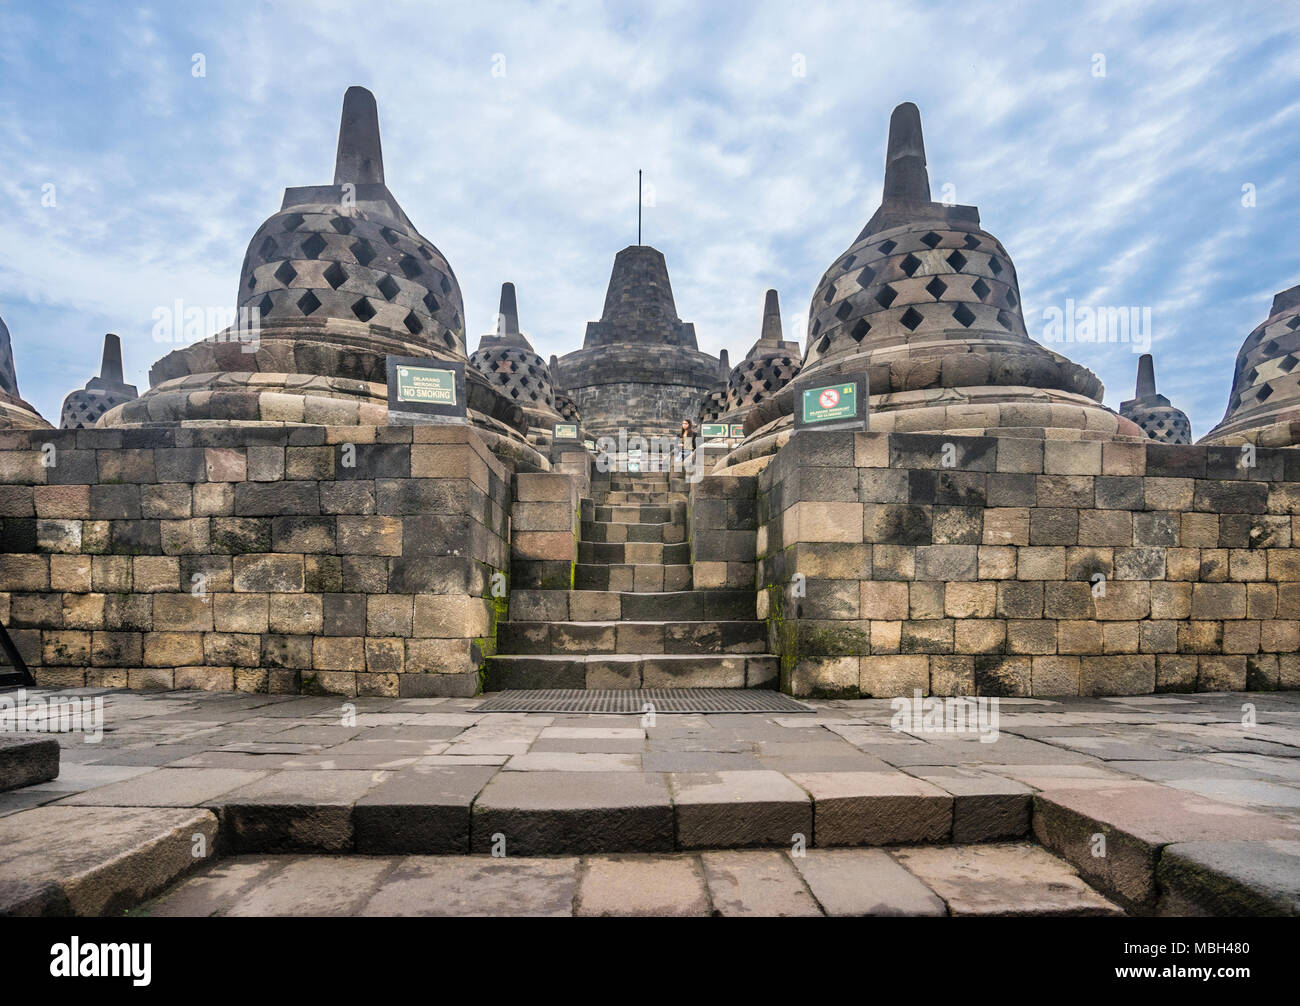 perforated stupas containing Buddha statues on the circular top terraces of 9th century Borobudur Buddhist temple, Central Java, Indonesia Stock Photo